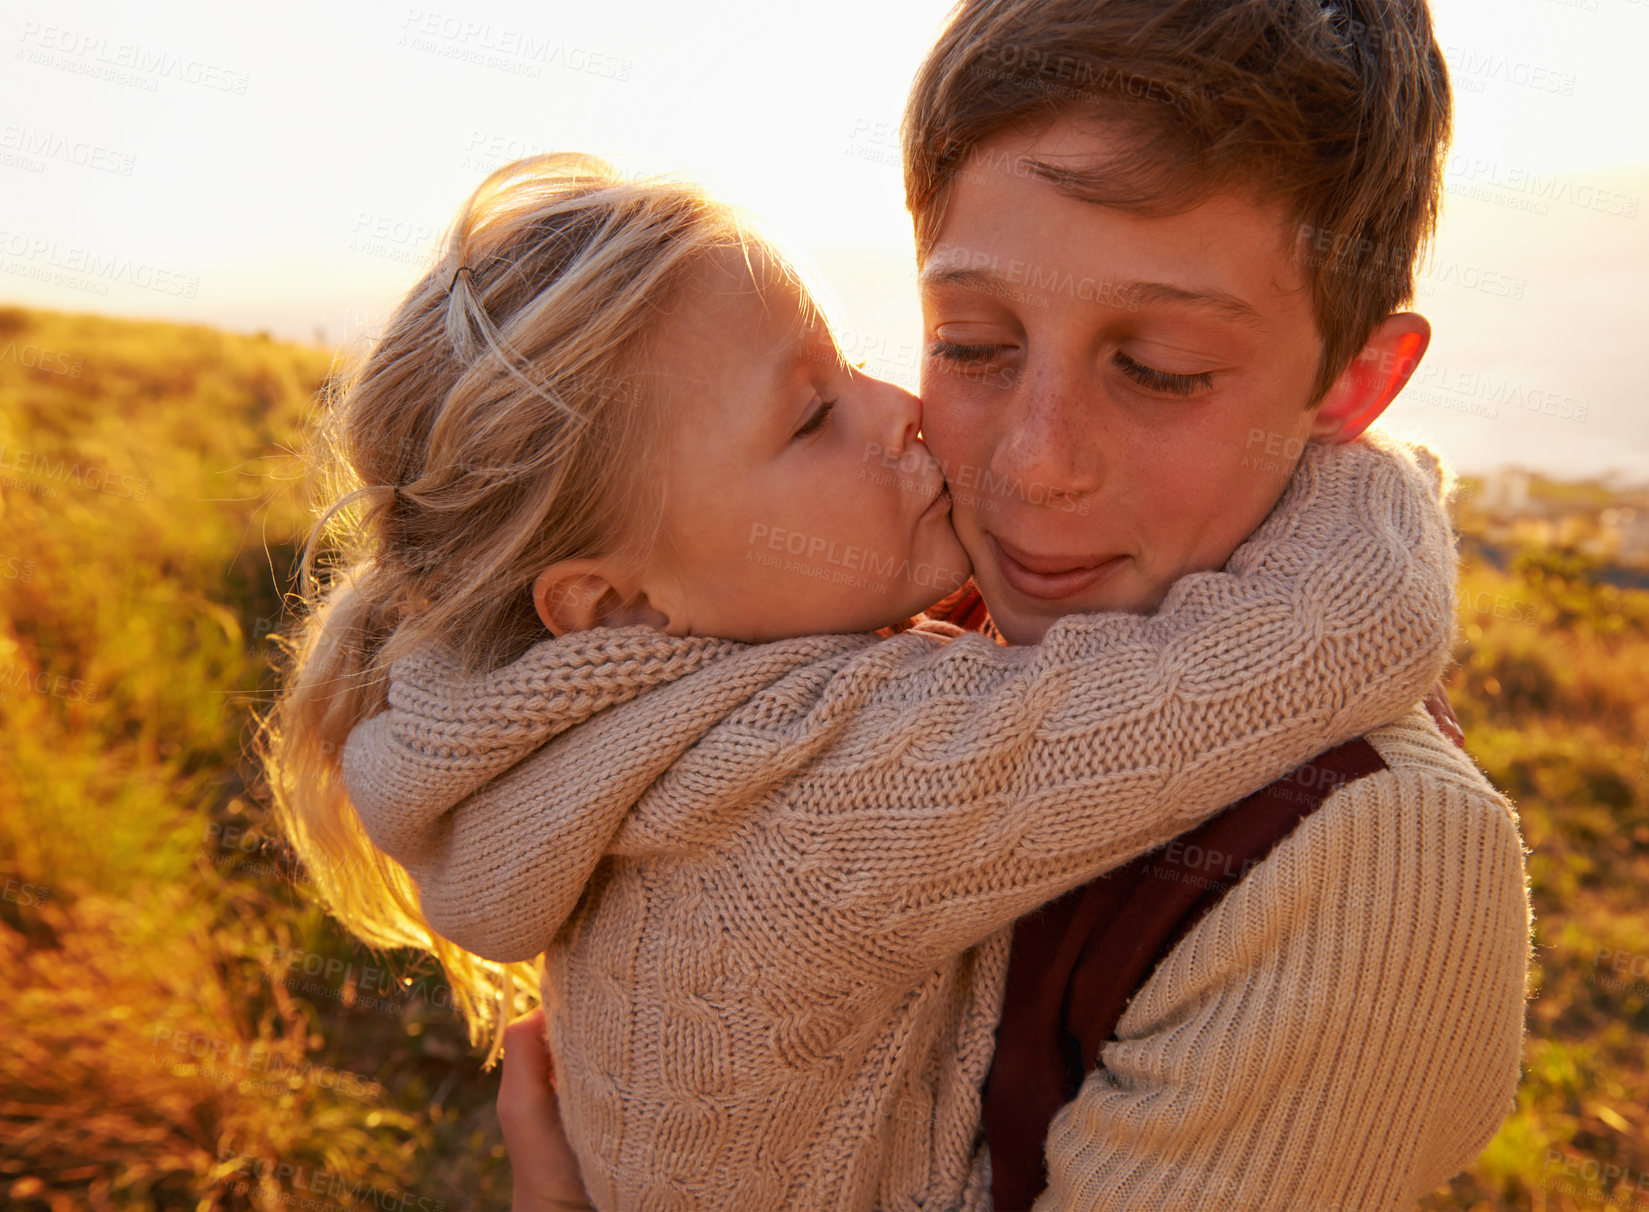 Buy stock photo Cropped shot of a little girl giving her brother a kiss on the cheek while outdoors